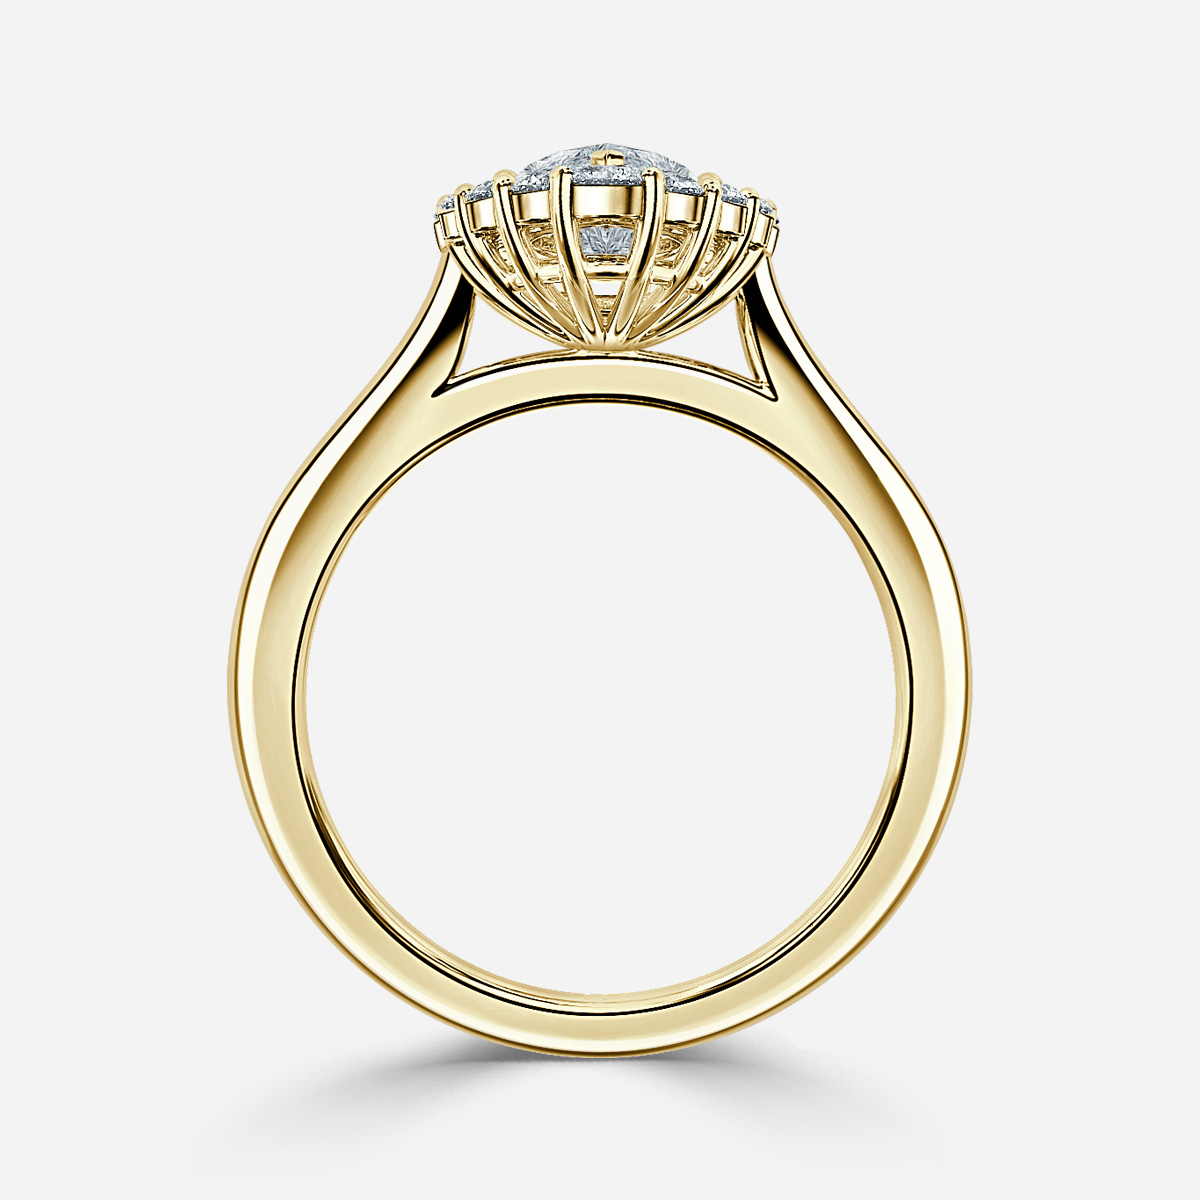 Marisol Yellow Gold Cluster Engagement Ring